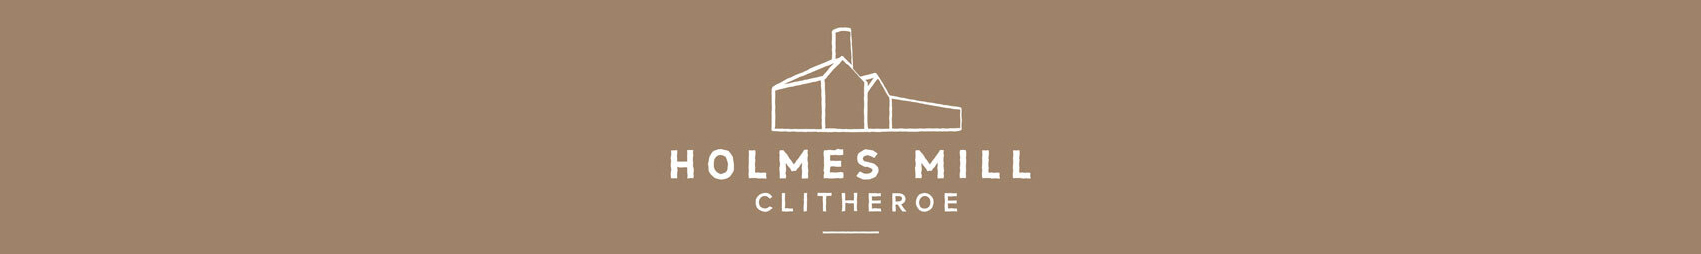 20220908 Holmes Mill Footer